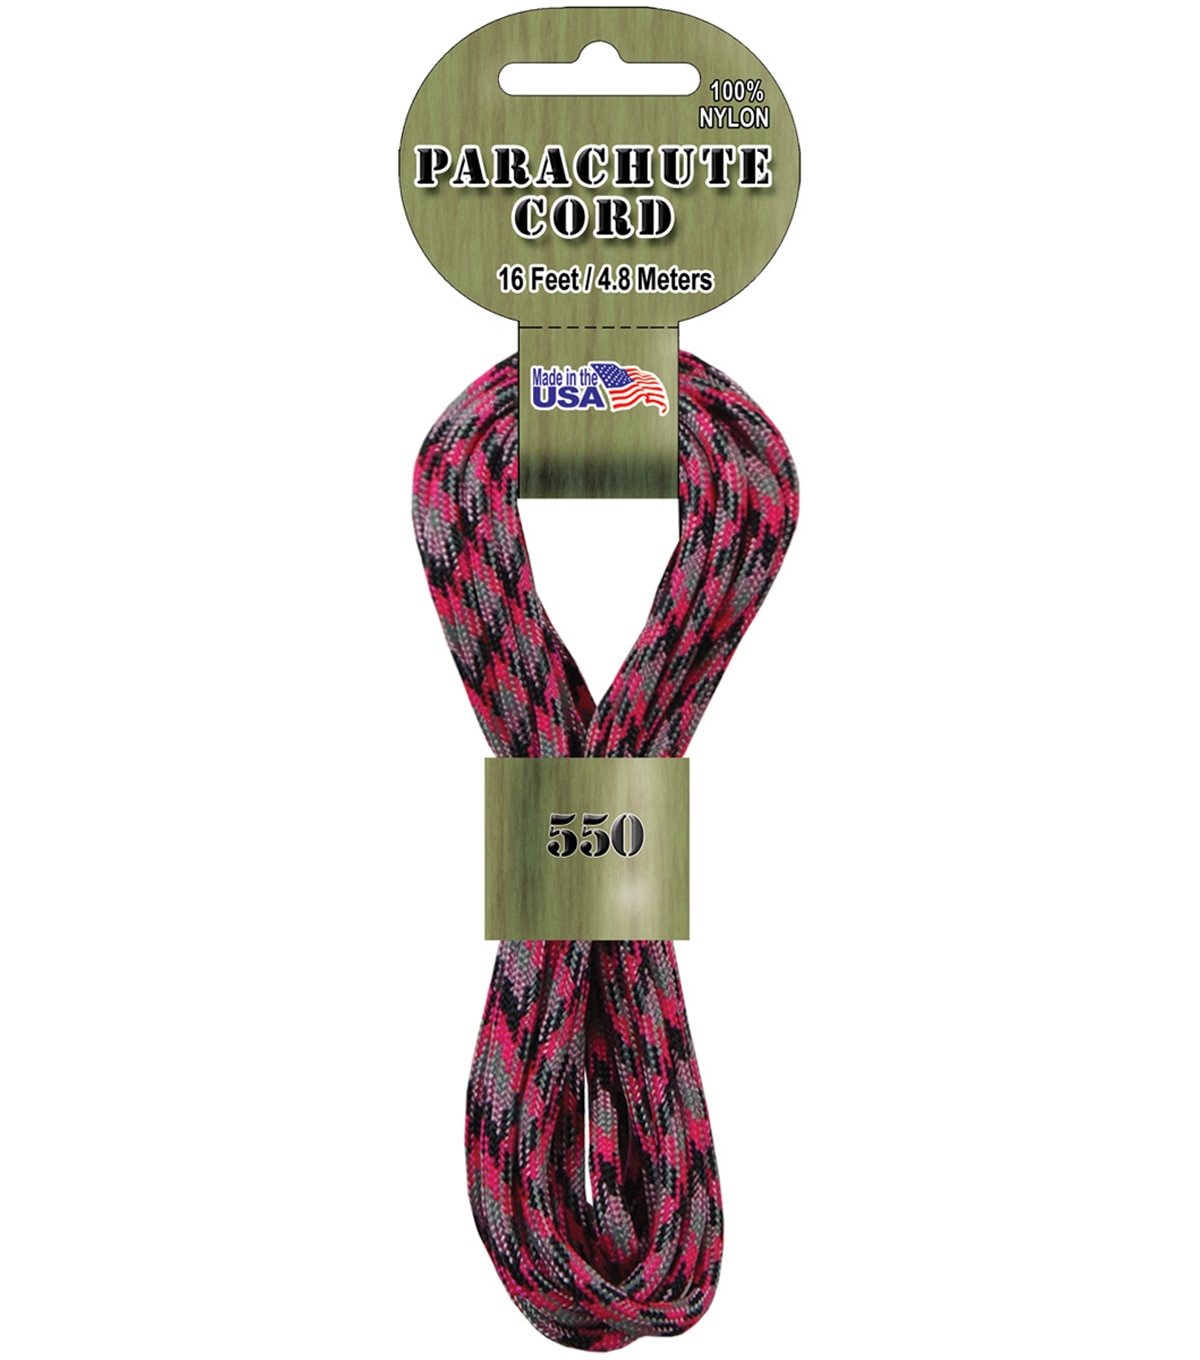 3mm x 16' Parachute Cord by hildie & jo